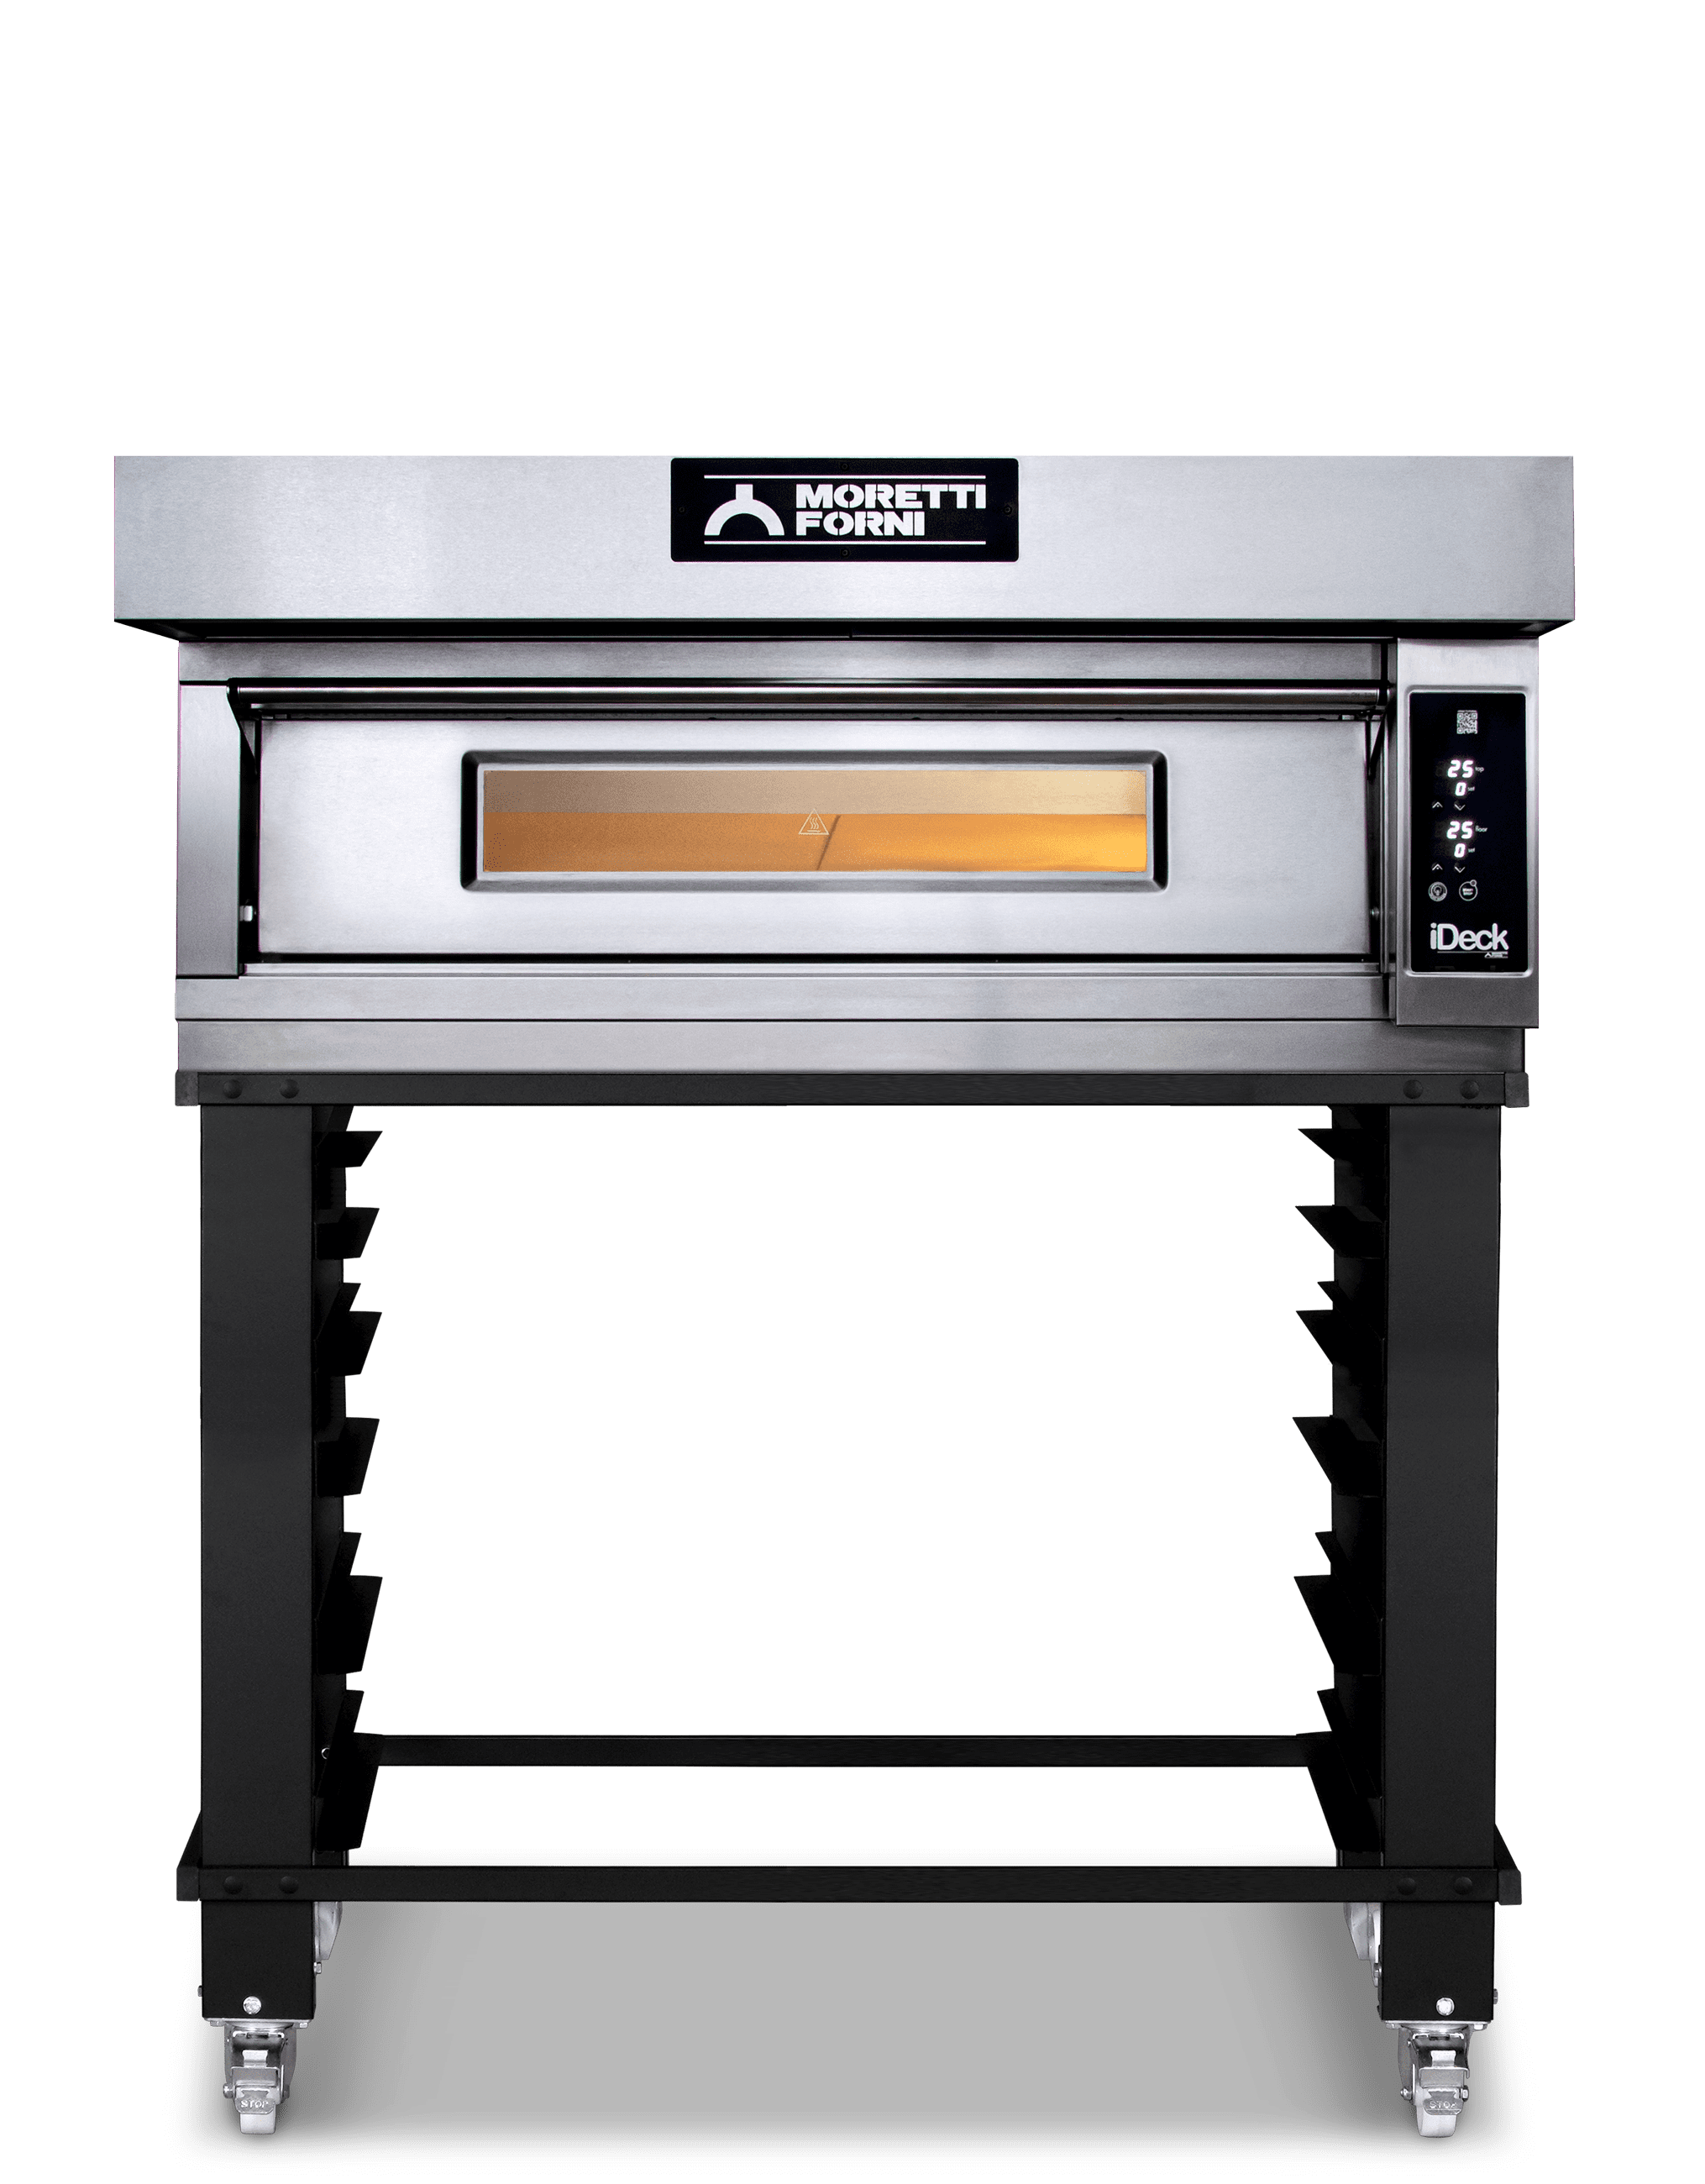 ID-M 105.65 iDeck electronic Control Electric Pizza Oven 41" x 25" chamber (Internal) . 1 Deck